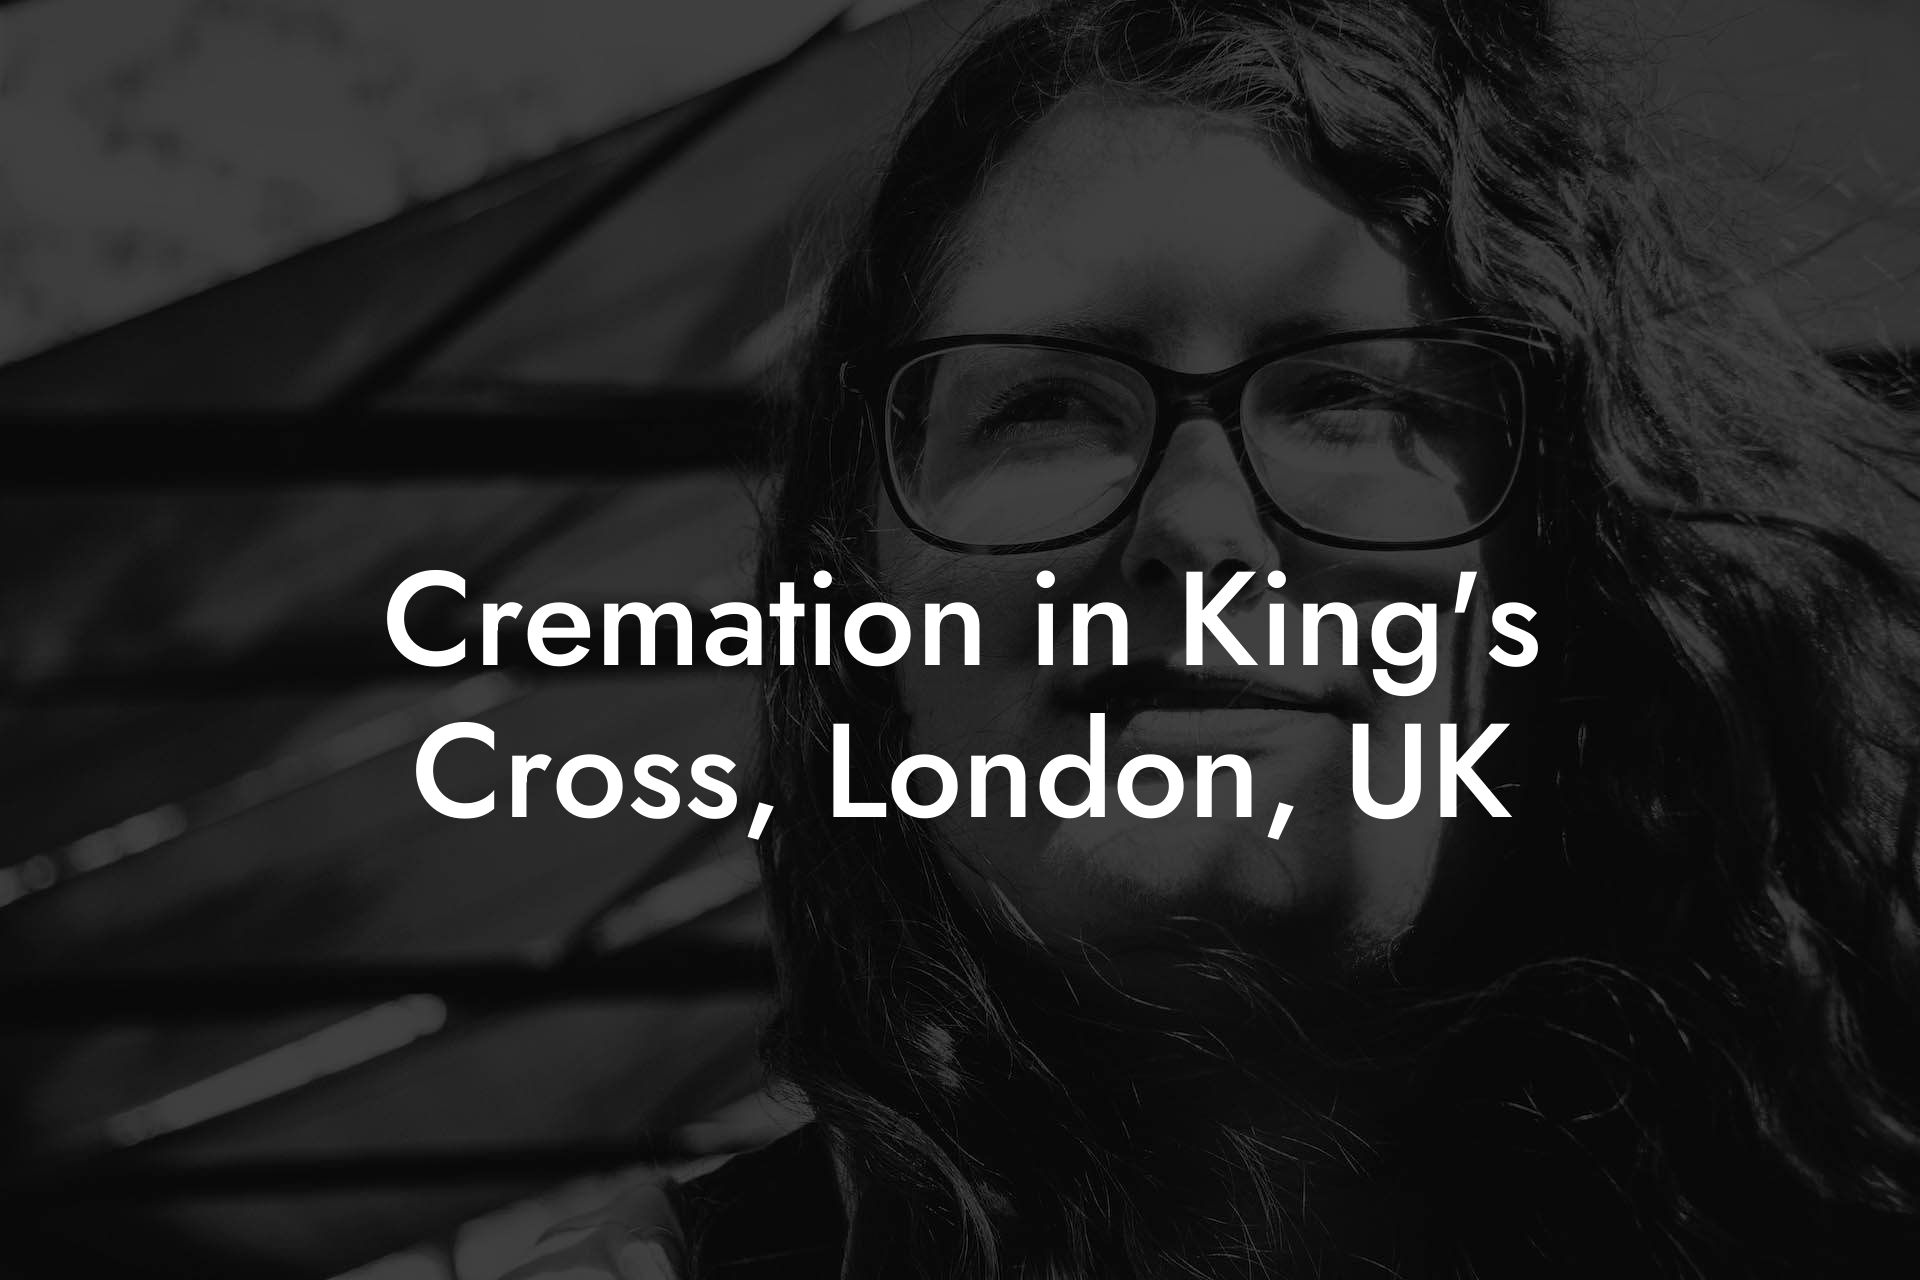 Cremation in King's Cross, London, UK